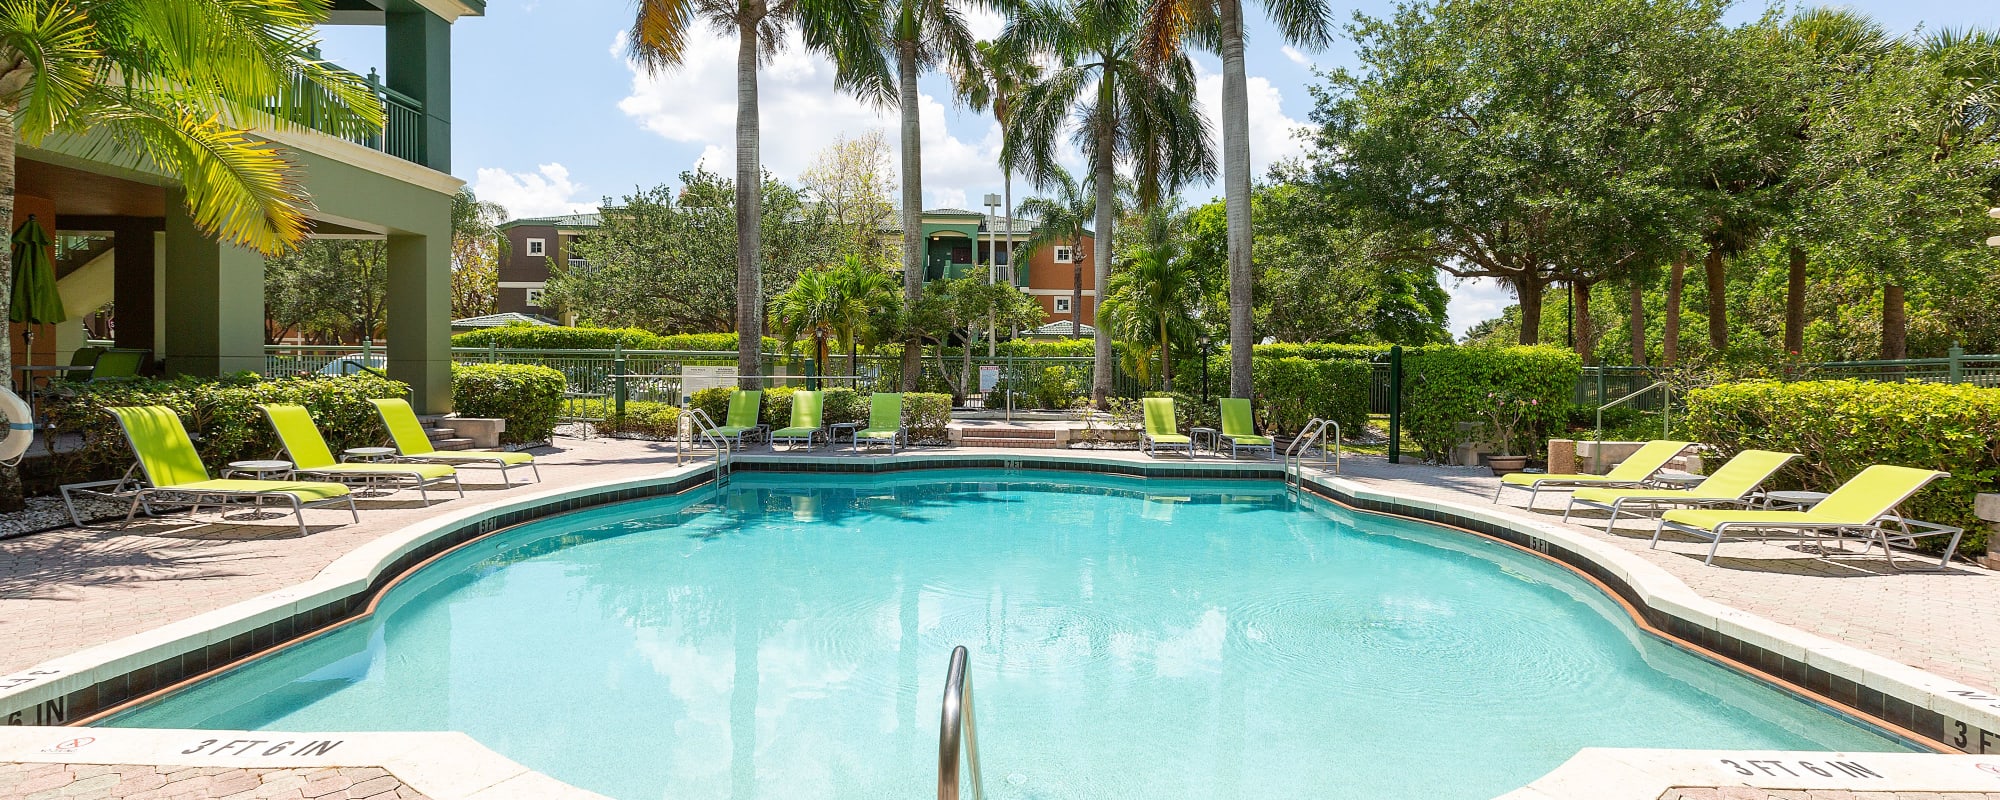 Map and directions to Club Mira Lago Apartments in Coral Springs, Florida